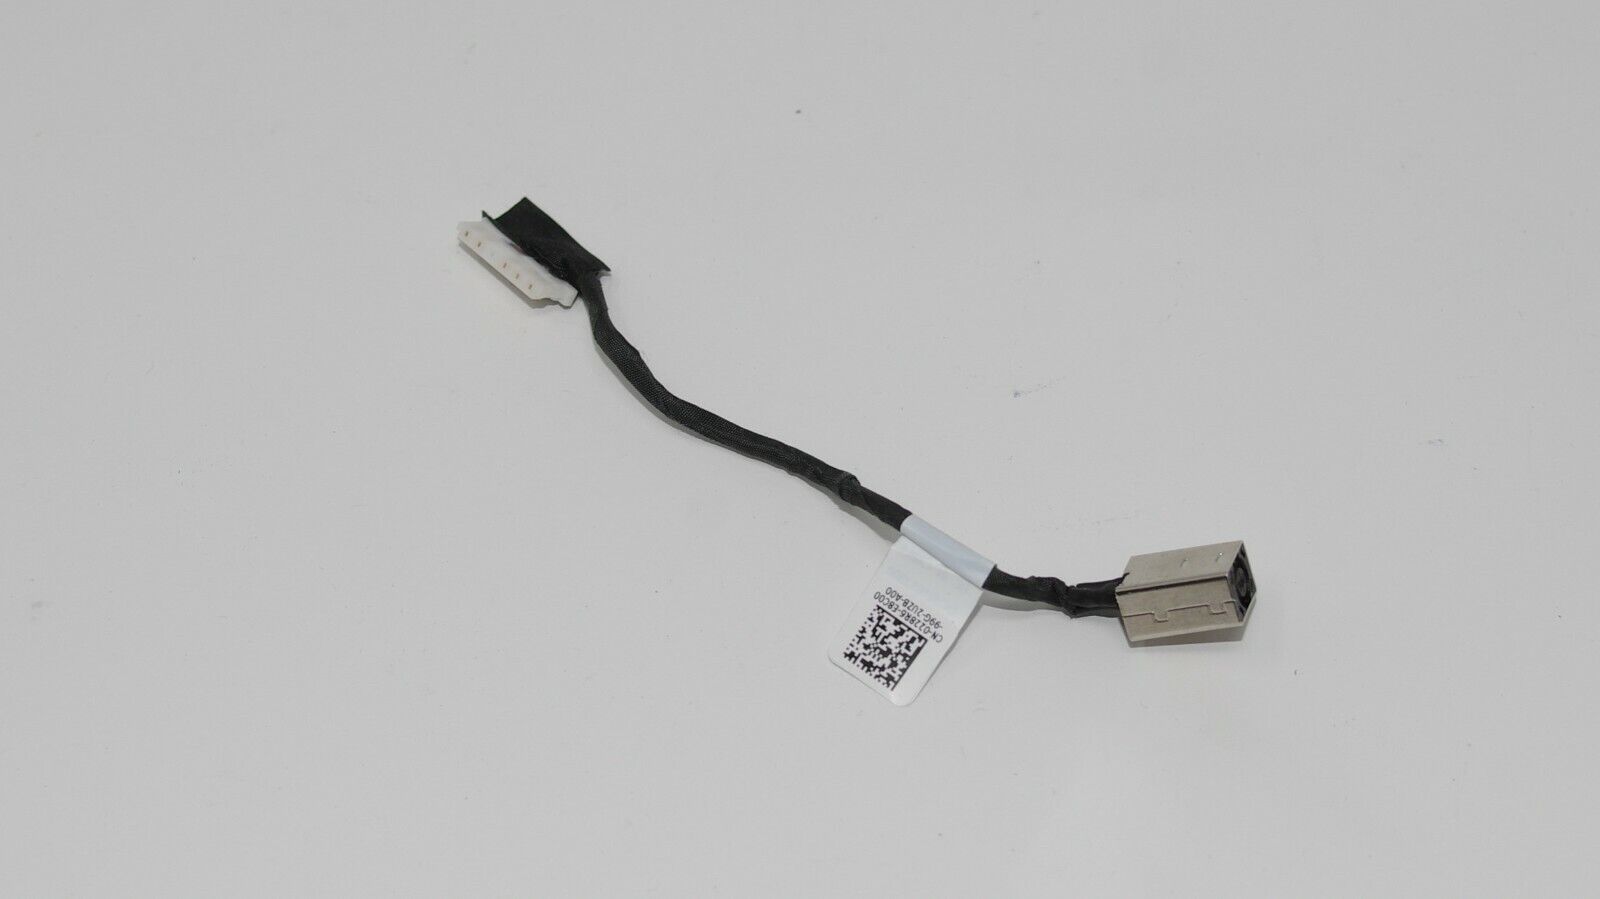 Dell Latitude 3490 3590 Inspiron Animer and Surprise price price revision 3583 DC Jack w Input 3482 Power